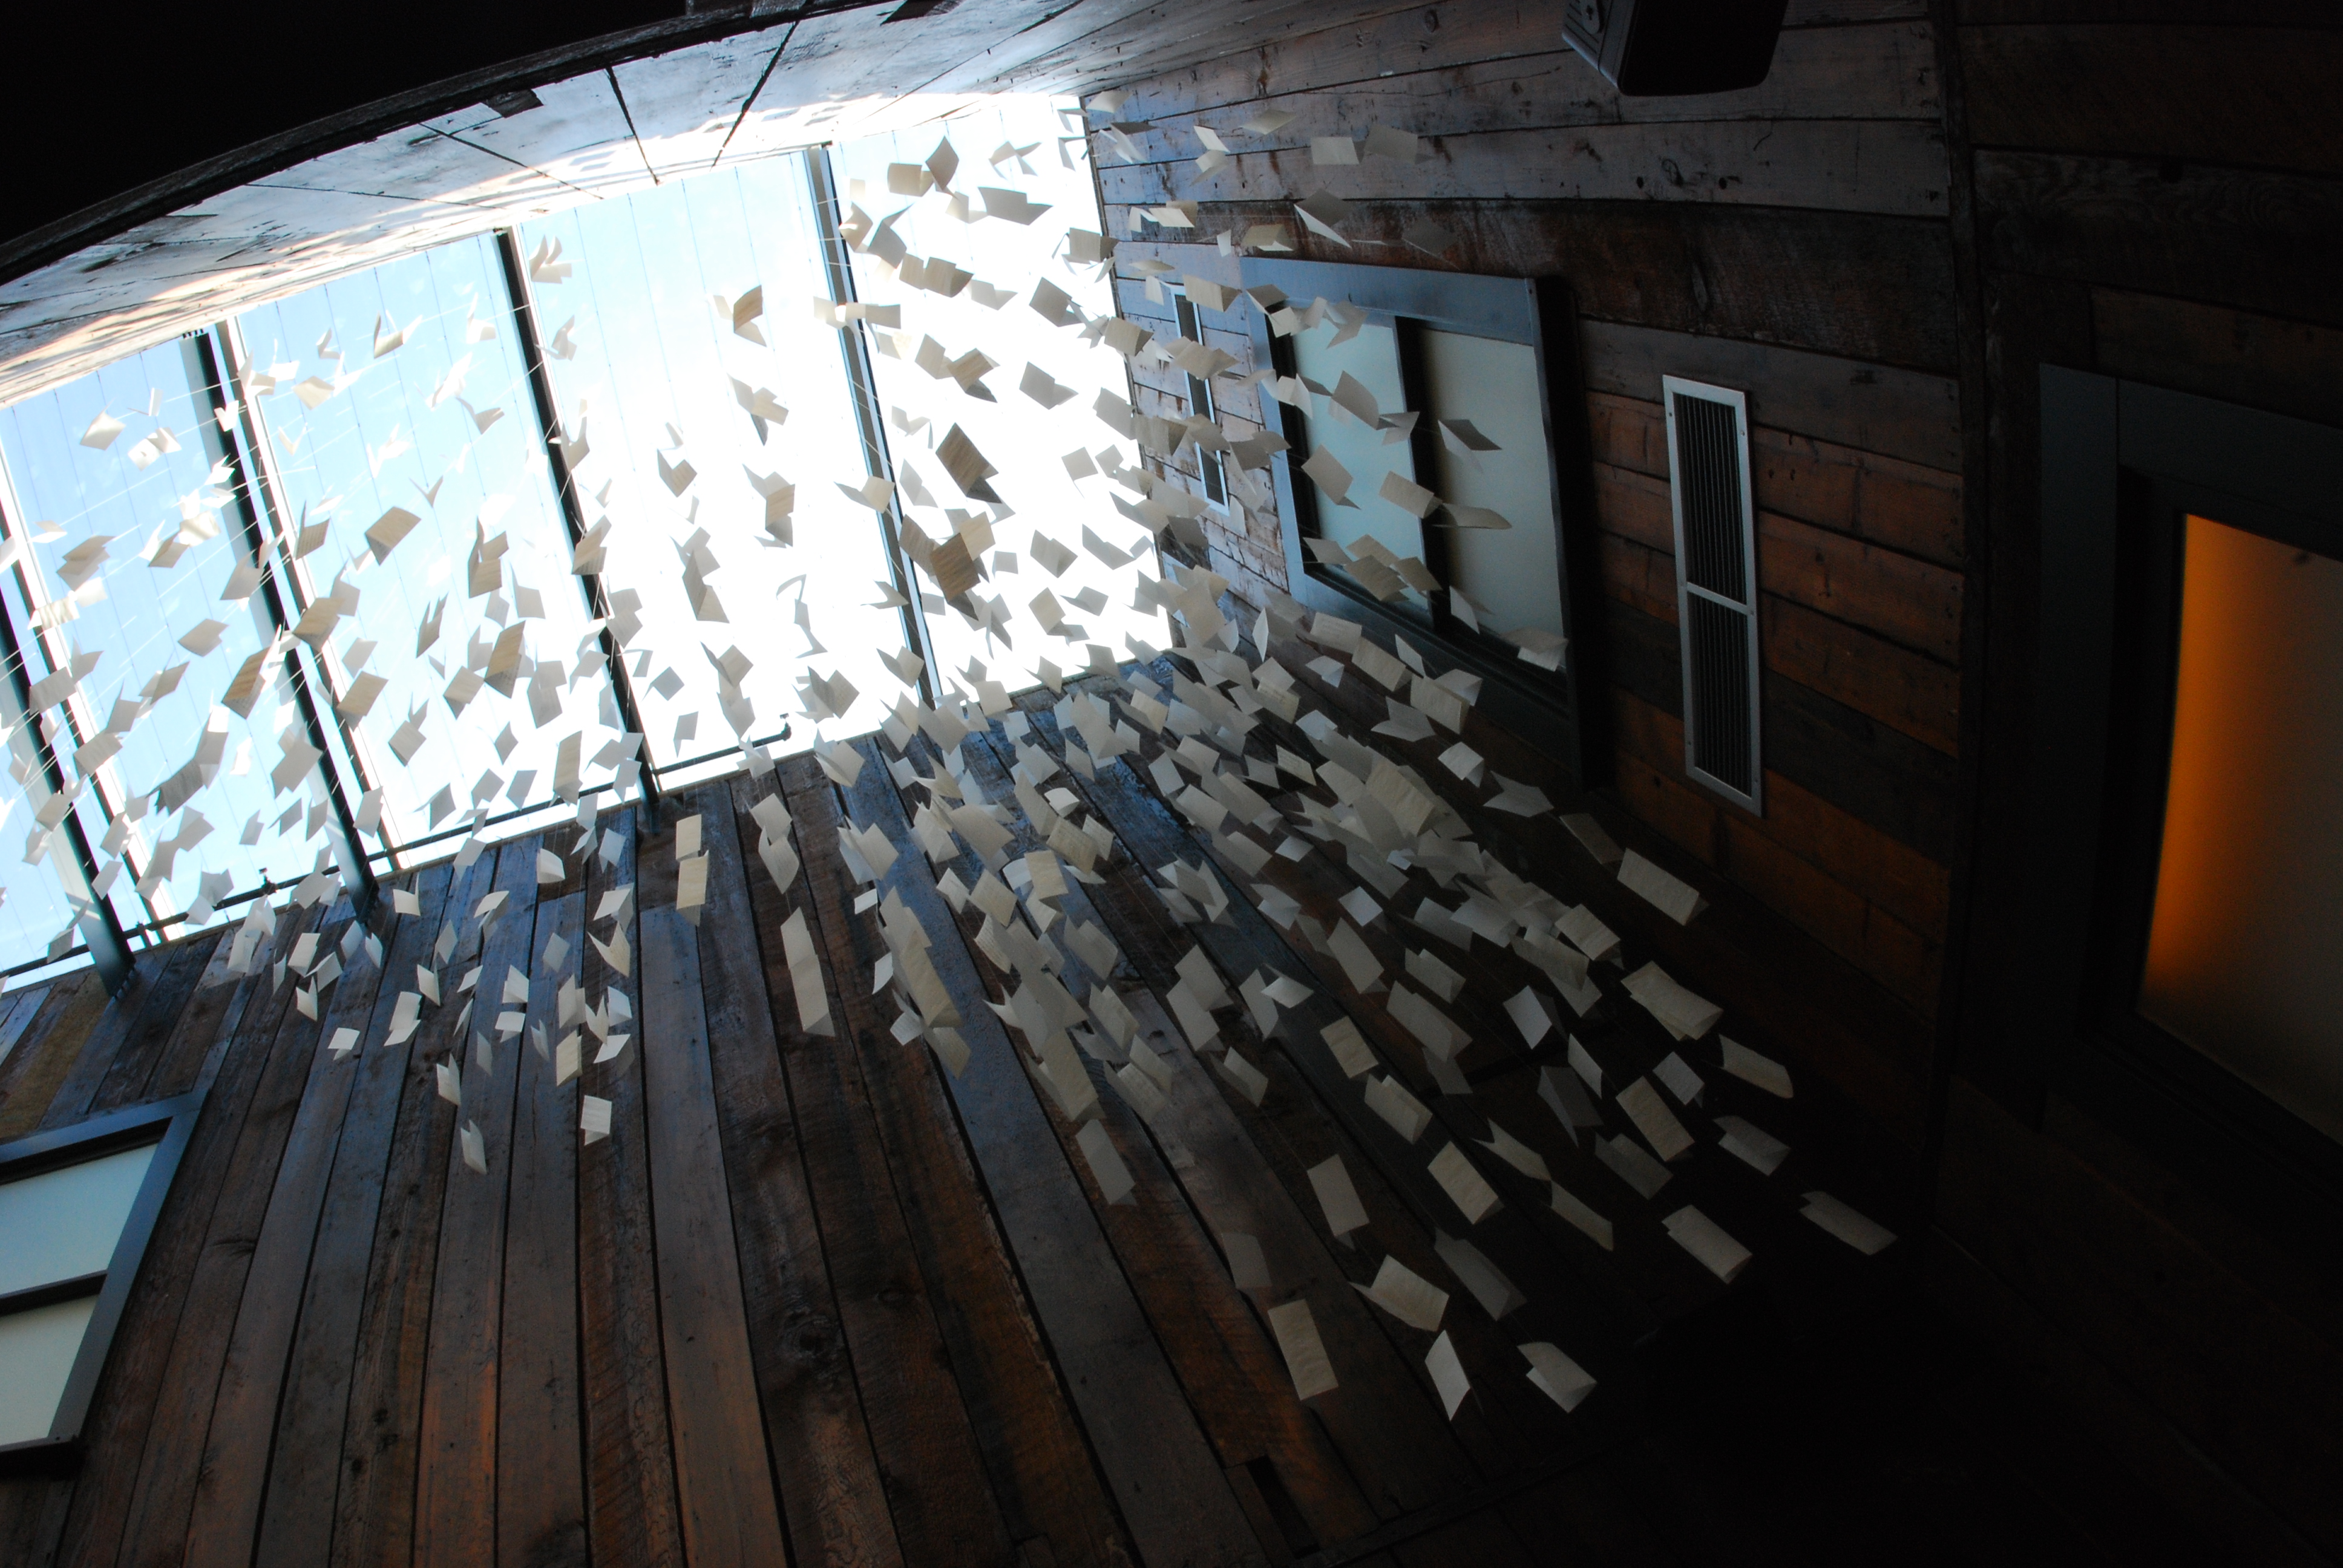 a mobile of letters written on white paper hangs in the museum lobby